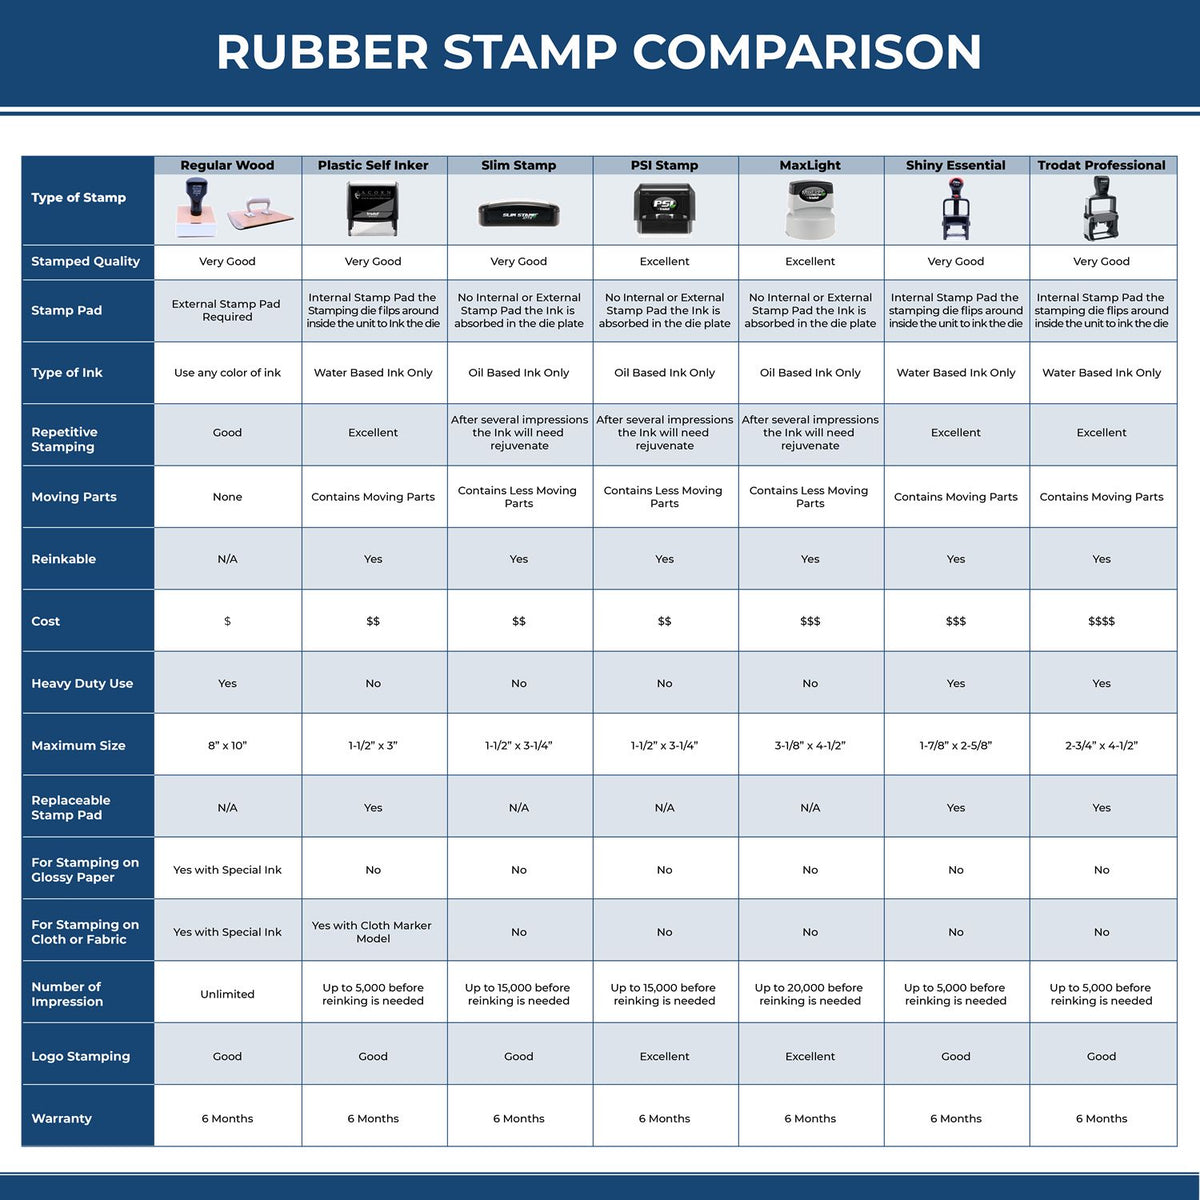 Standard Mail A Rubber Stamp 4756R Rubber Stamp Comparison